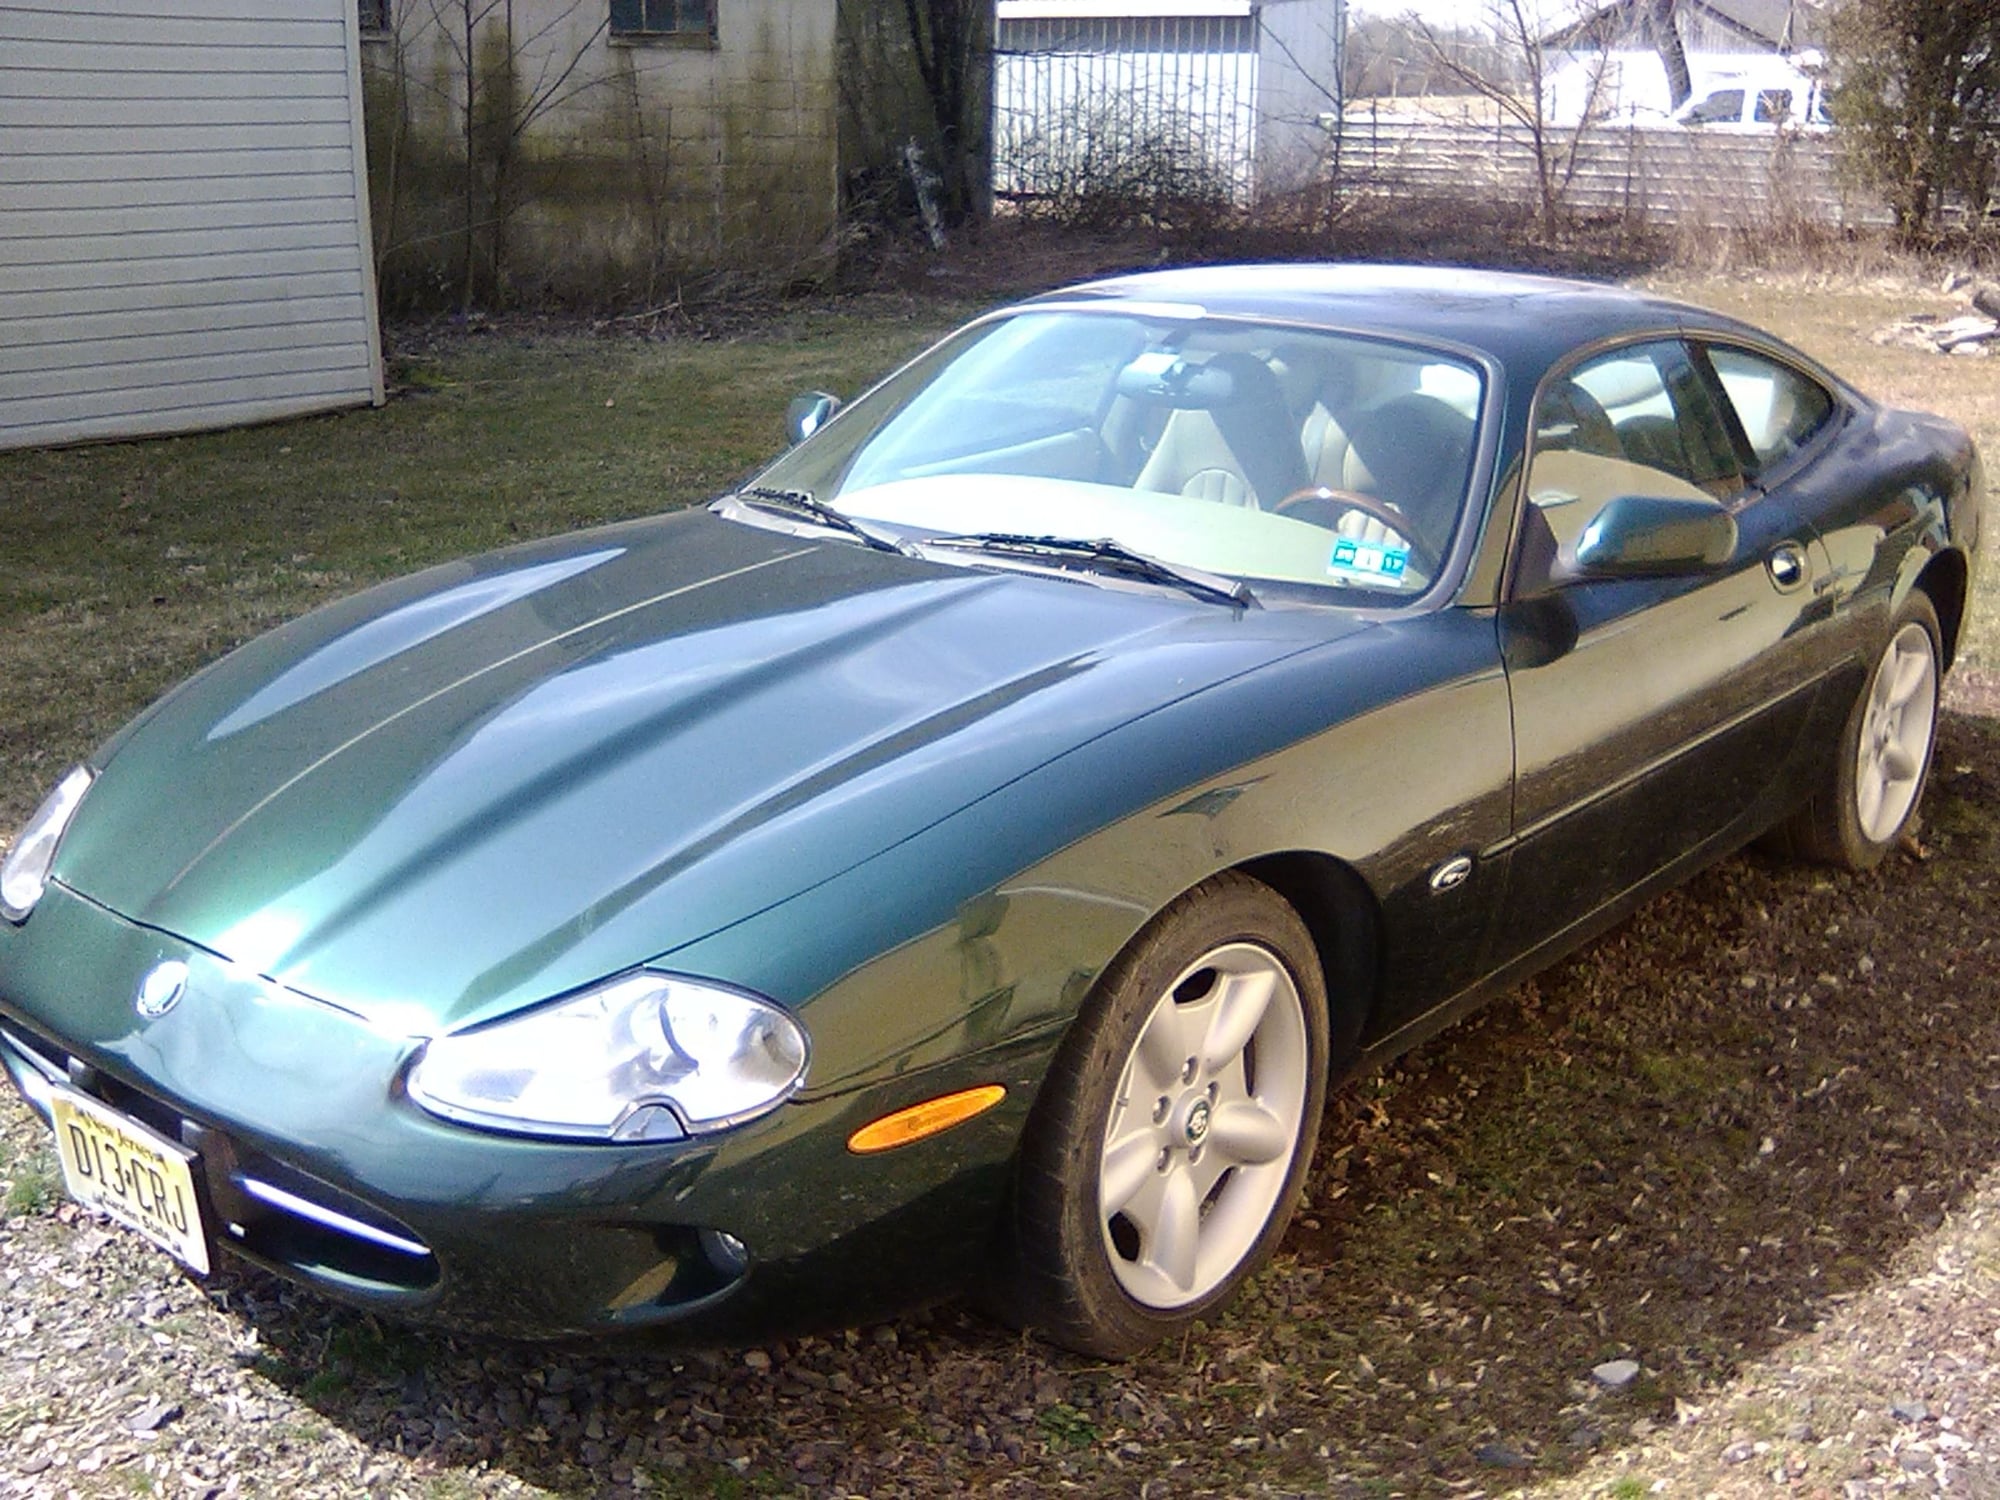 1997 Jaguar XK8 - Here it is: a monster 97 XK8 with alot of life left in the tank. - Used - VIN SAJGX5749VC011554 - 98,774 Miles - Trumbauersville, PA 18970, United States